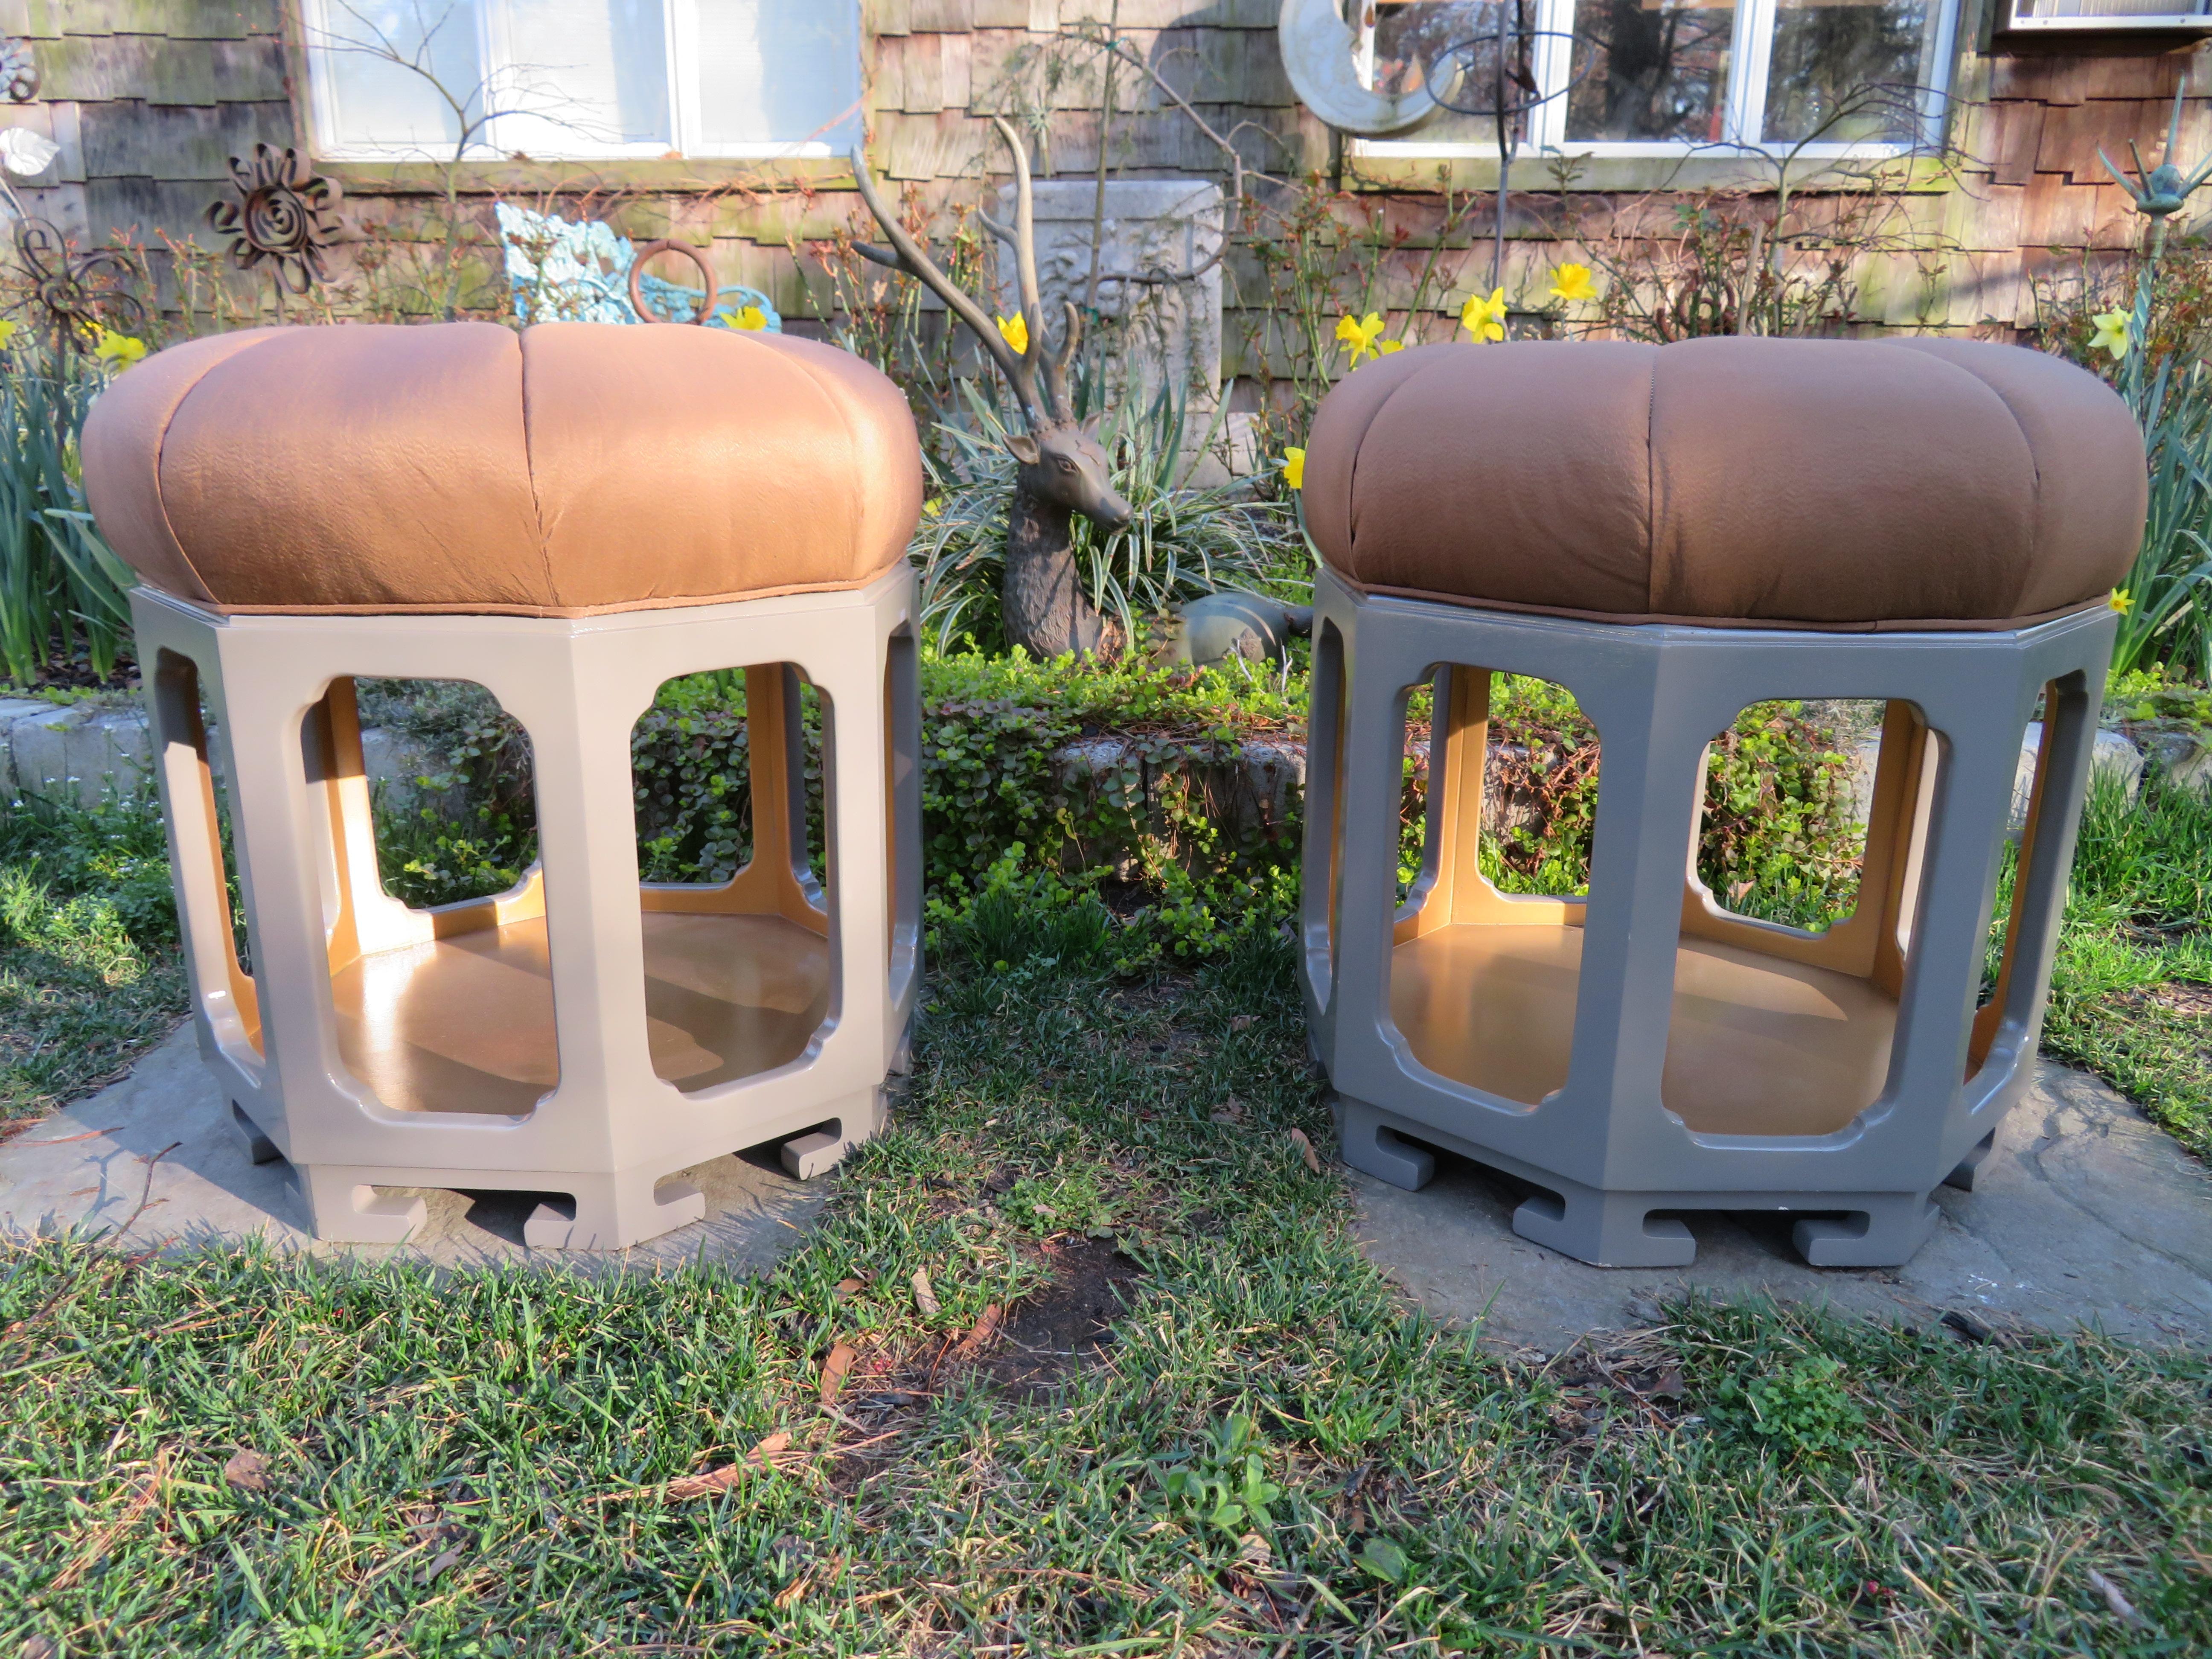 Stunning pair of chinoiserie style octagon shaped stools with fabulous one button tufted upholstery. These were totally restored to like new condition about 10 years ago by a high end designer and they still look amazing. We love the bronze colored